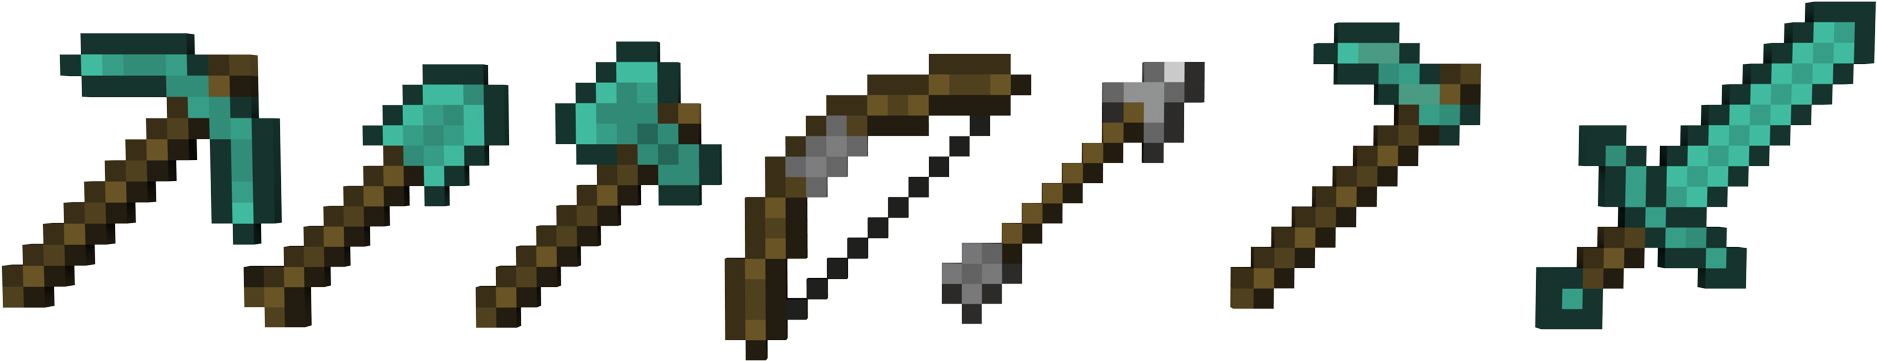 Minecraft Diamond Sword Png - Minecraft Bow Coloring Pages (1920x1080), Png Download